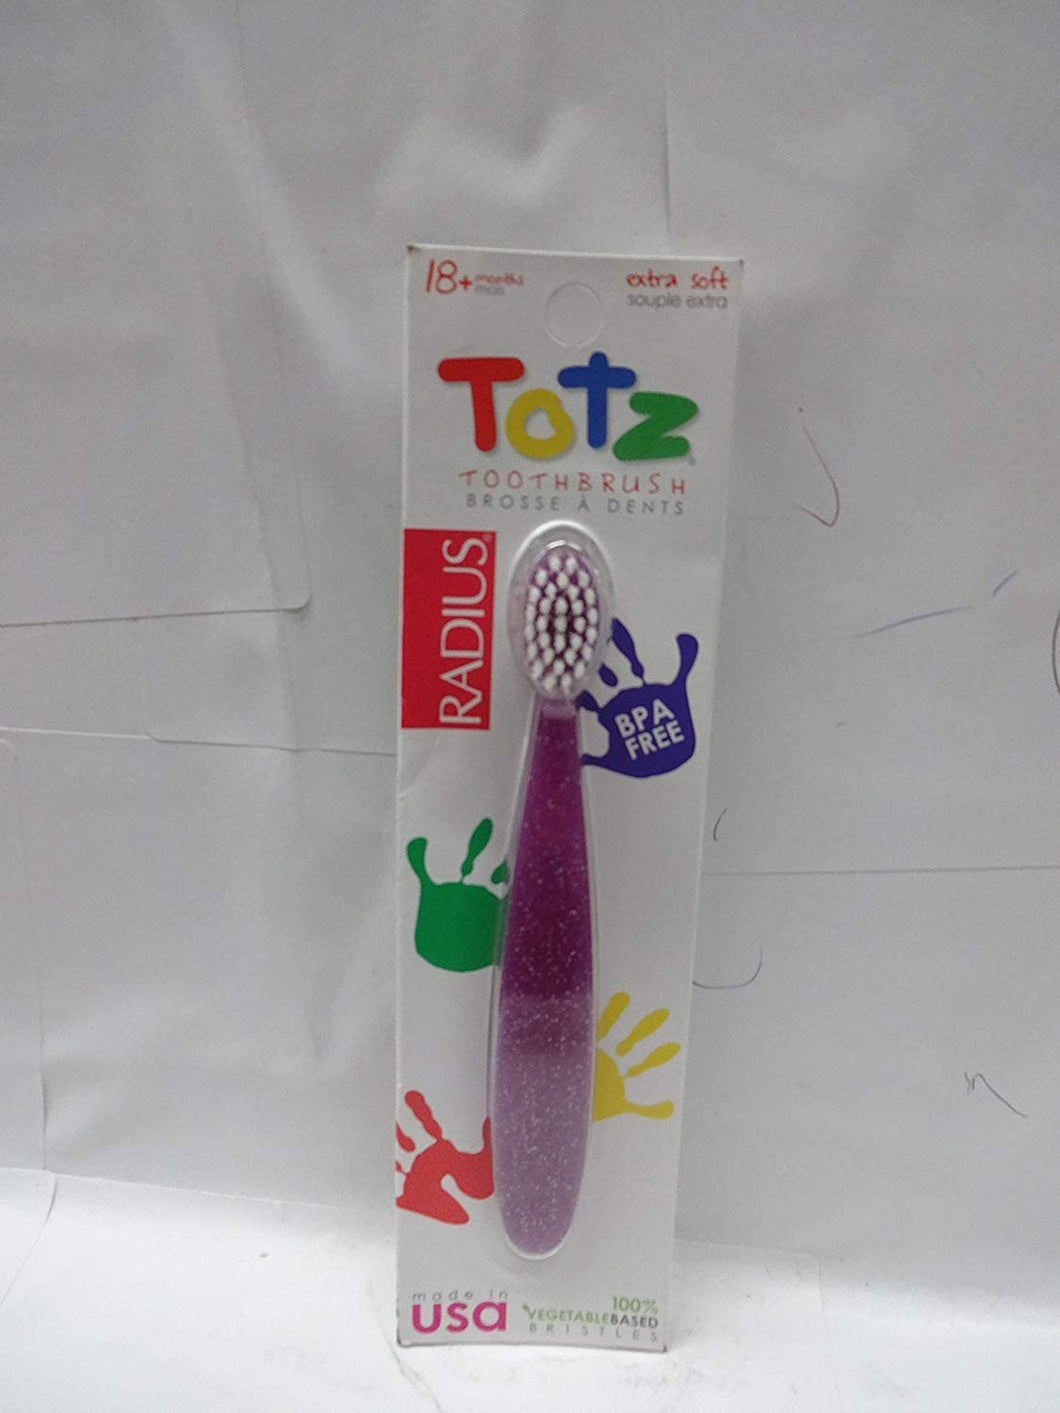 RADIUS Extra Soft Totz Toothbrush Ultra Soft BPA Free ADA Accepted Designed for Delicate Teeth for Kids 18 Months and Older Colors May Vary